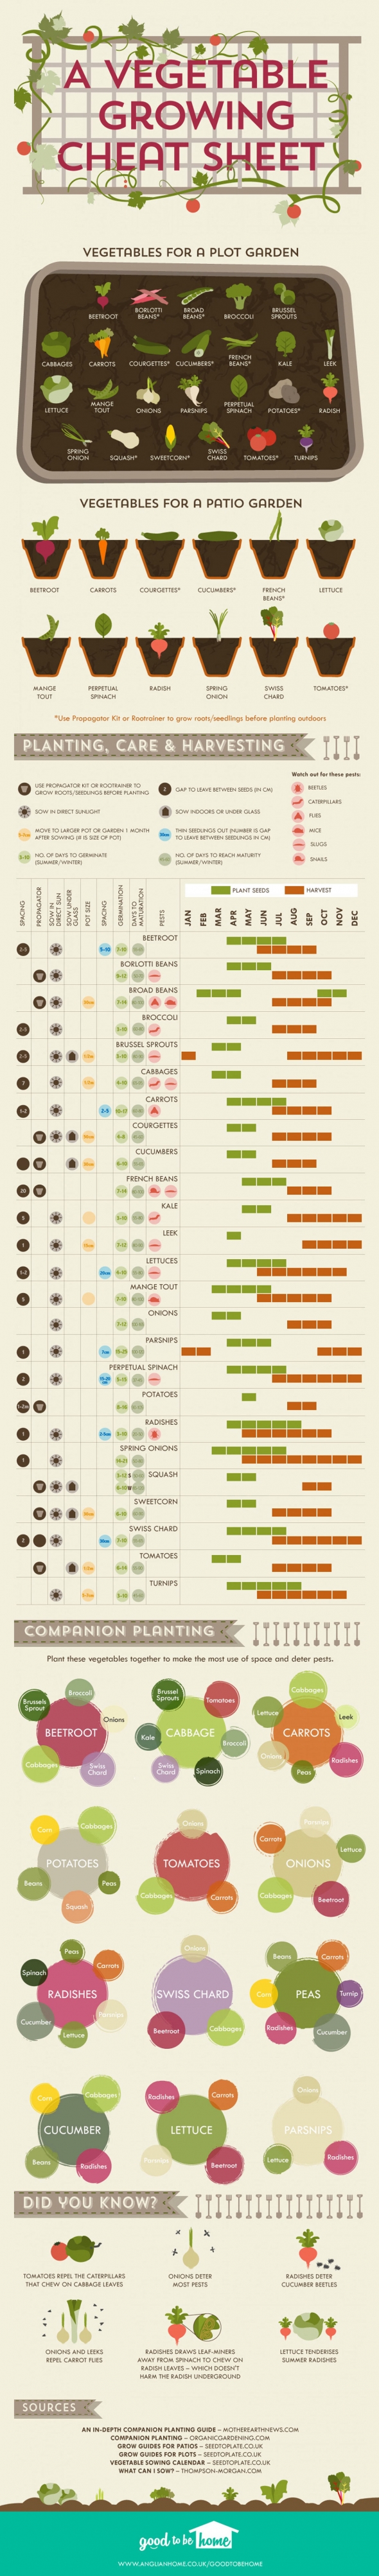 The Vegetable Growing Cheat Sheet [Infographic]